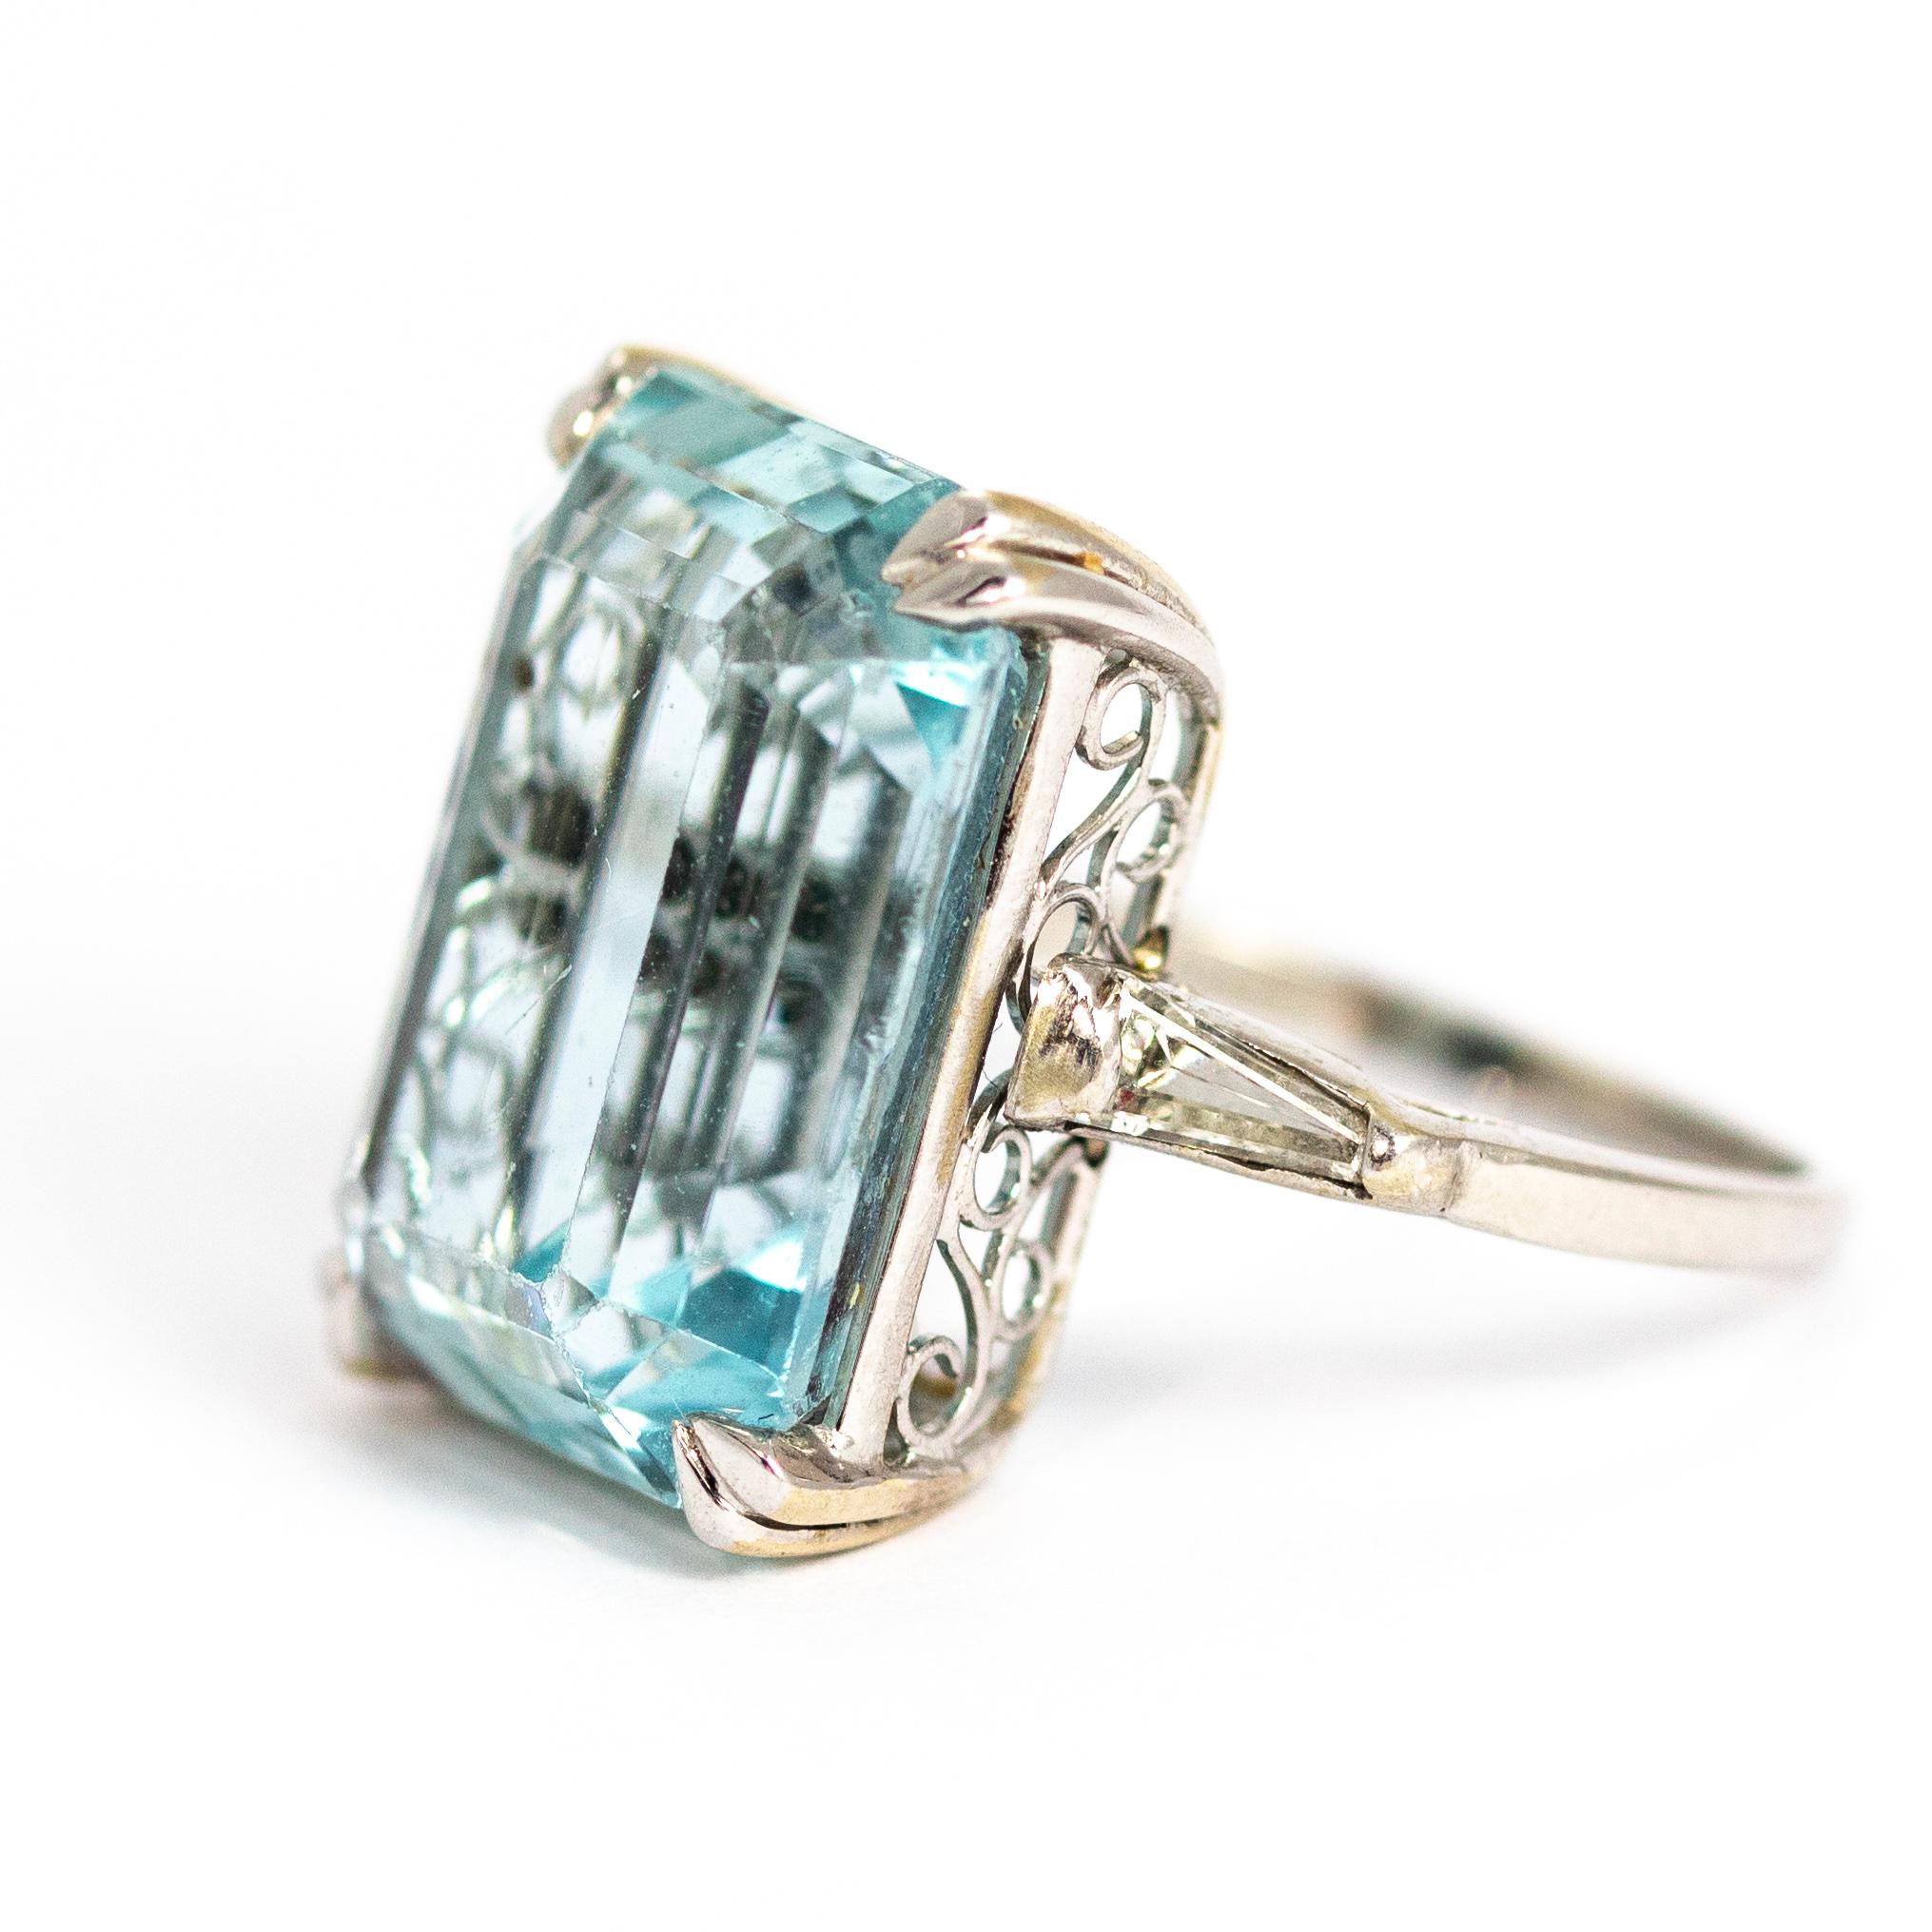 A spectacular Art Deco cocktail ring dating from circa 1910. The exquisite aquamarine measures 19.19mm by 13.98mm and has fantastic colour and depth, sitting in an elegant open gallery. Flanking the central stone are two glorious tapered